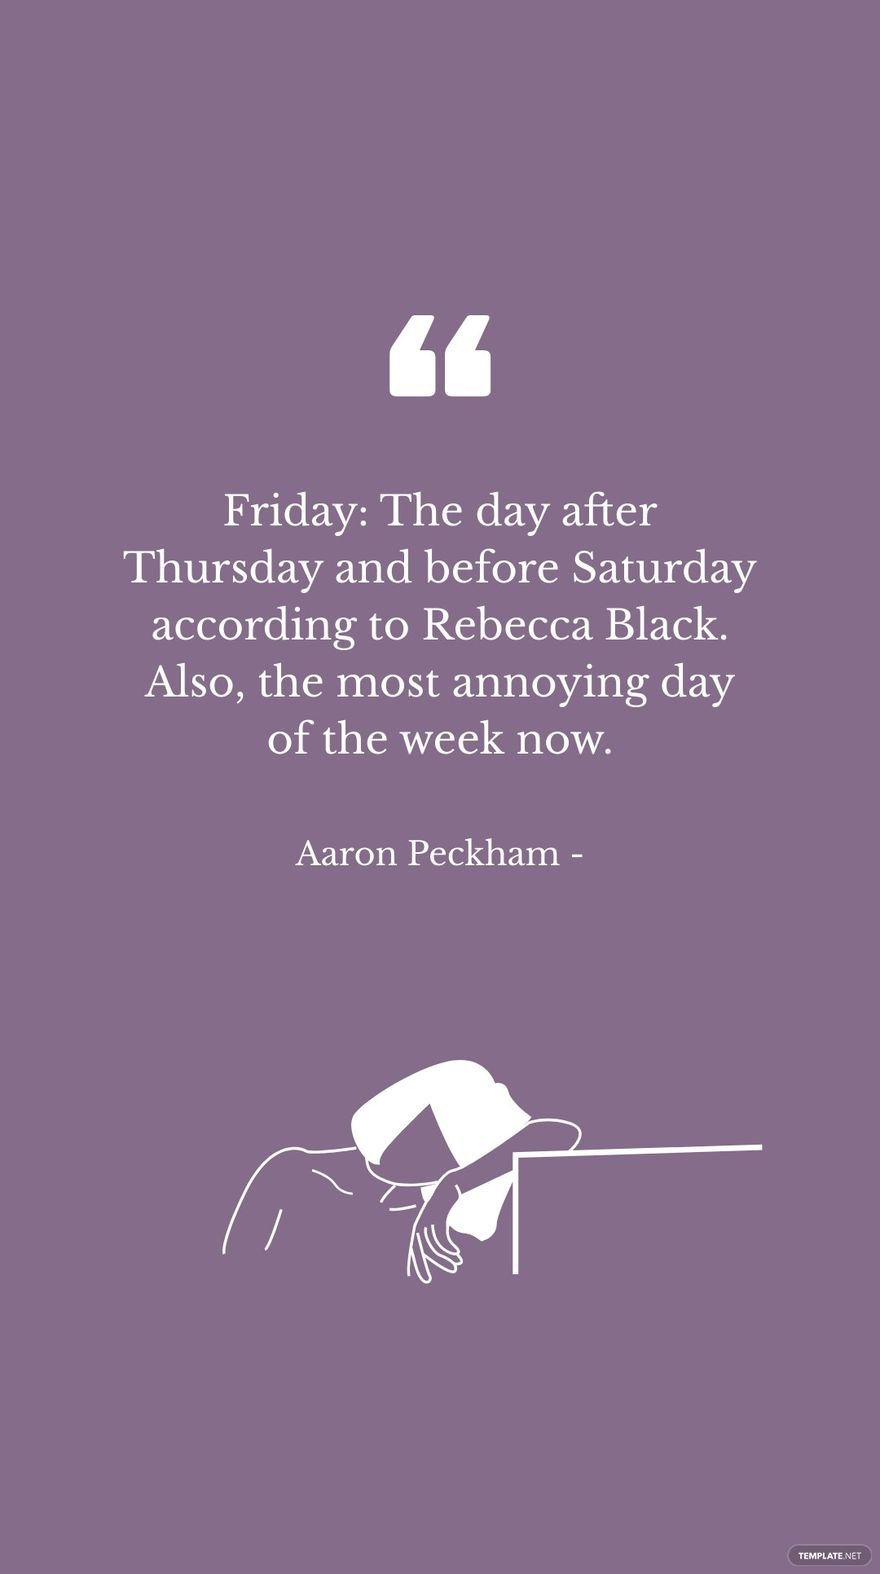 Aaron Peckham - Friday: The day after Thursday and before Saturday according to Rebecca Black. Also, the most annoying day of the week now. in JPG